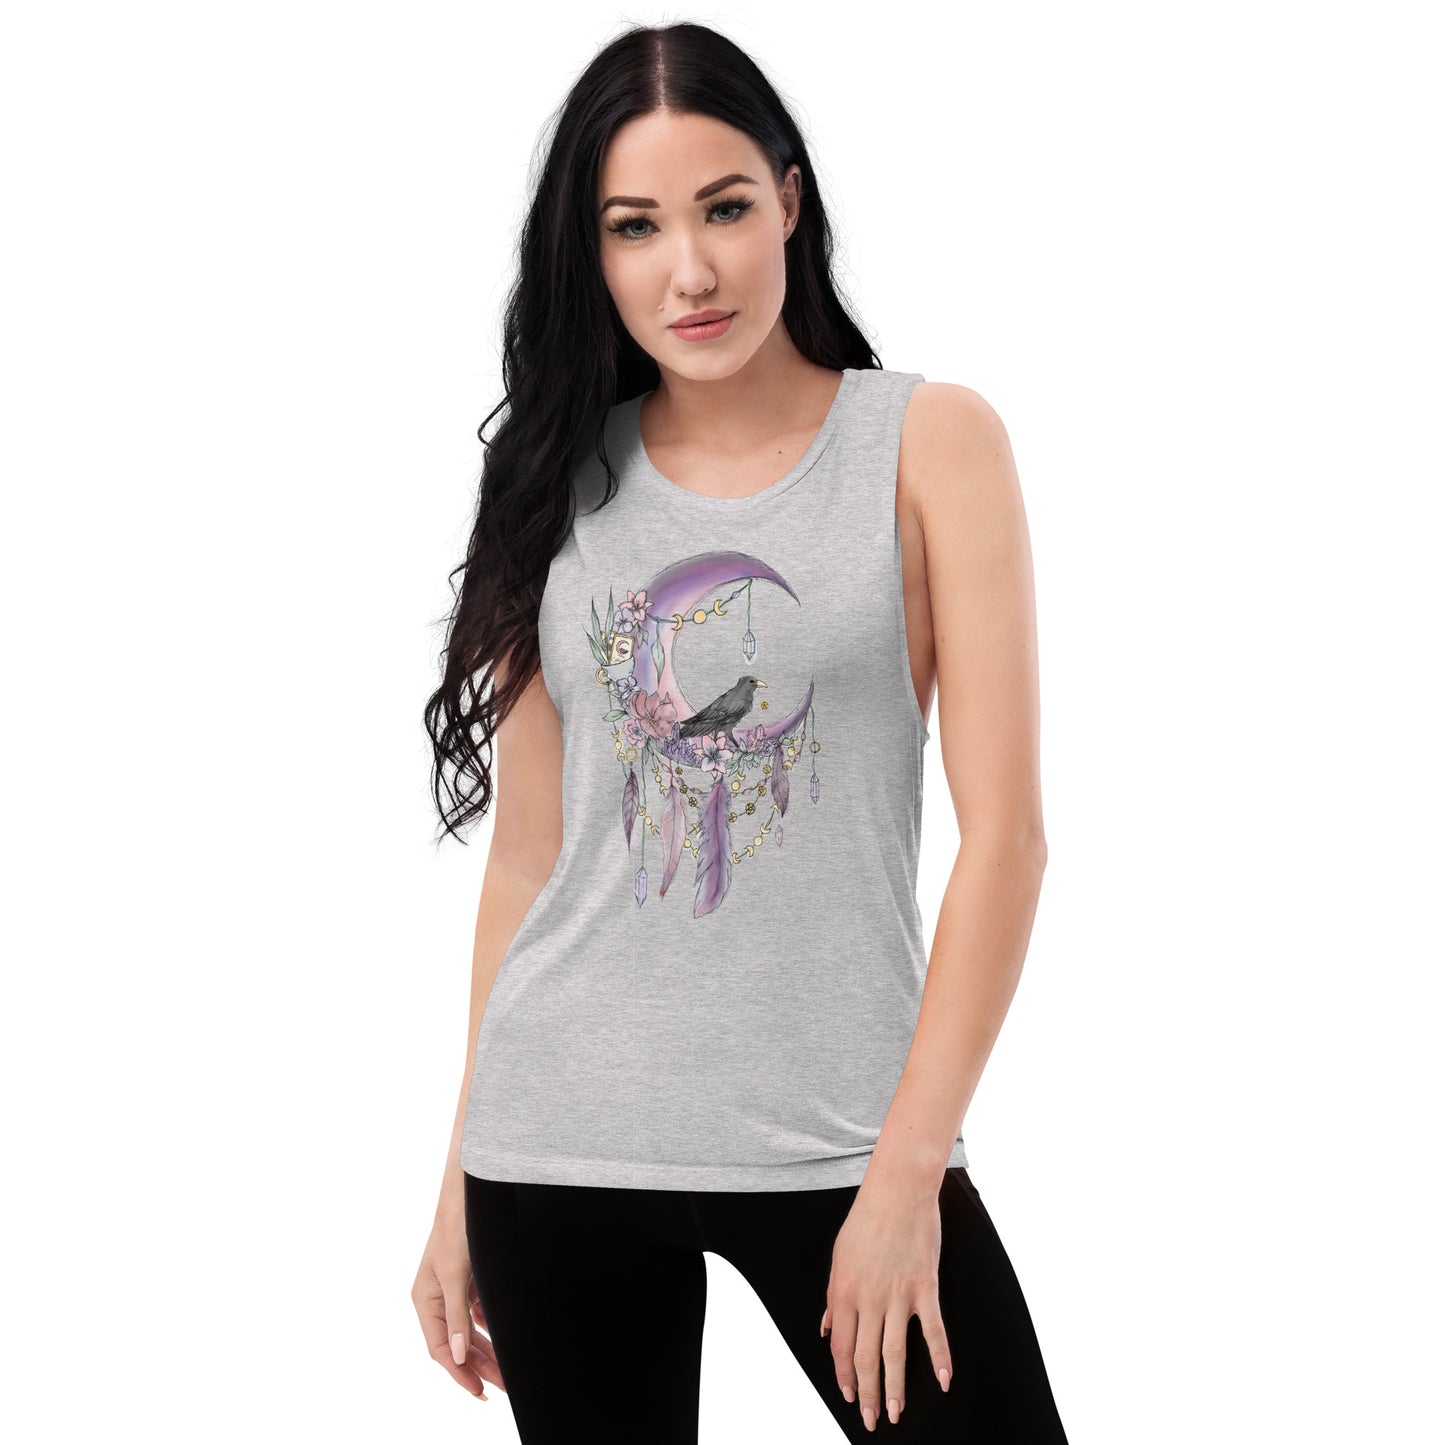 Collector Raven Ladies’ Muscle Tank